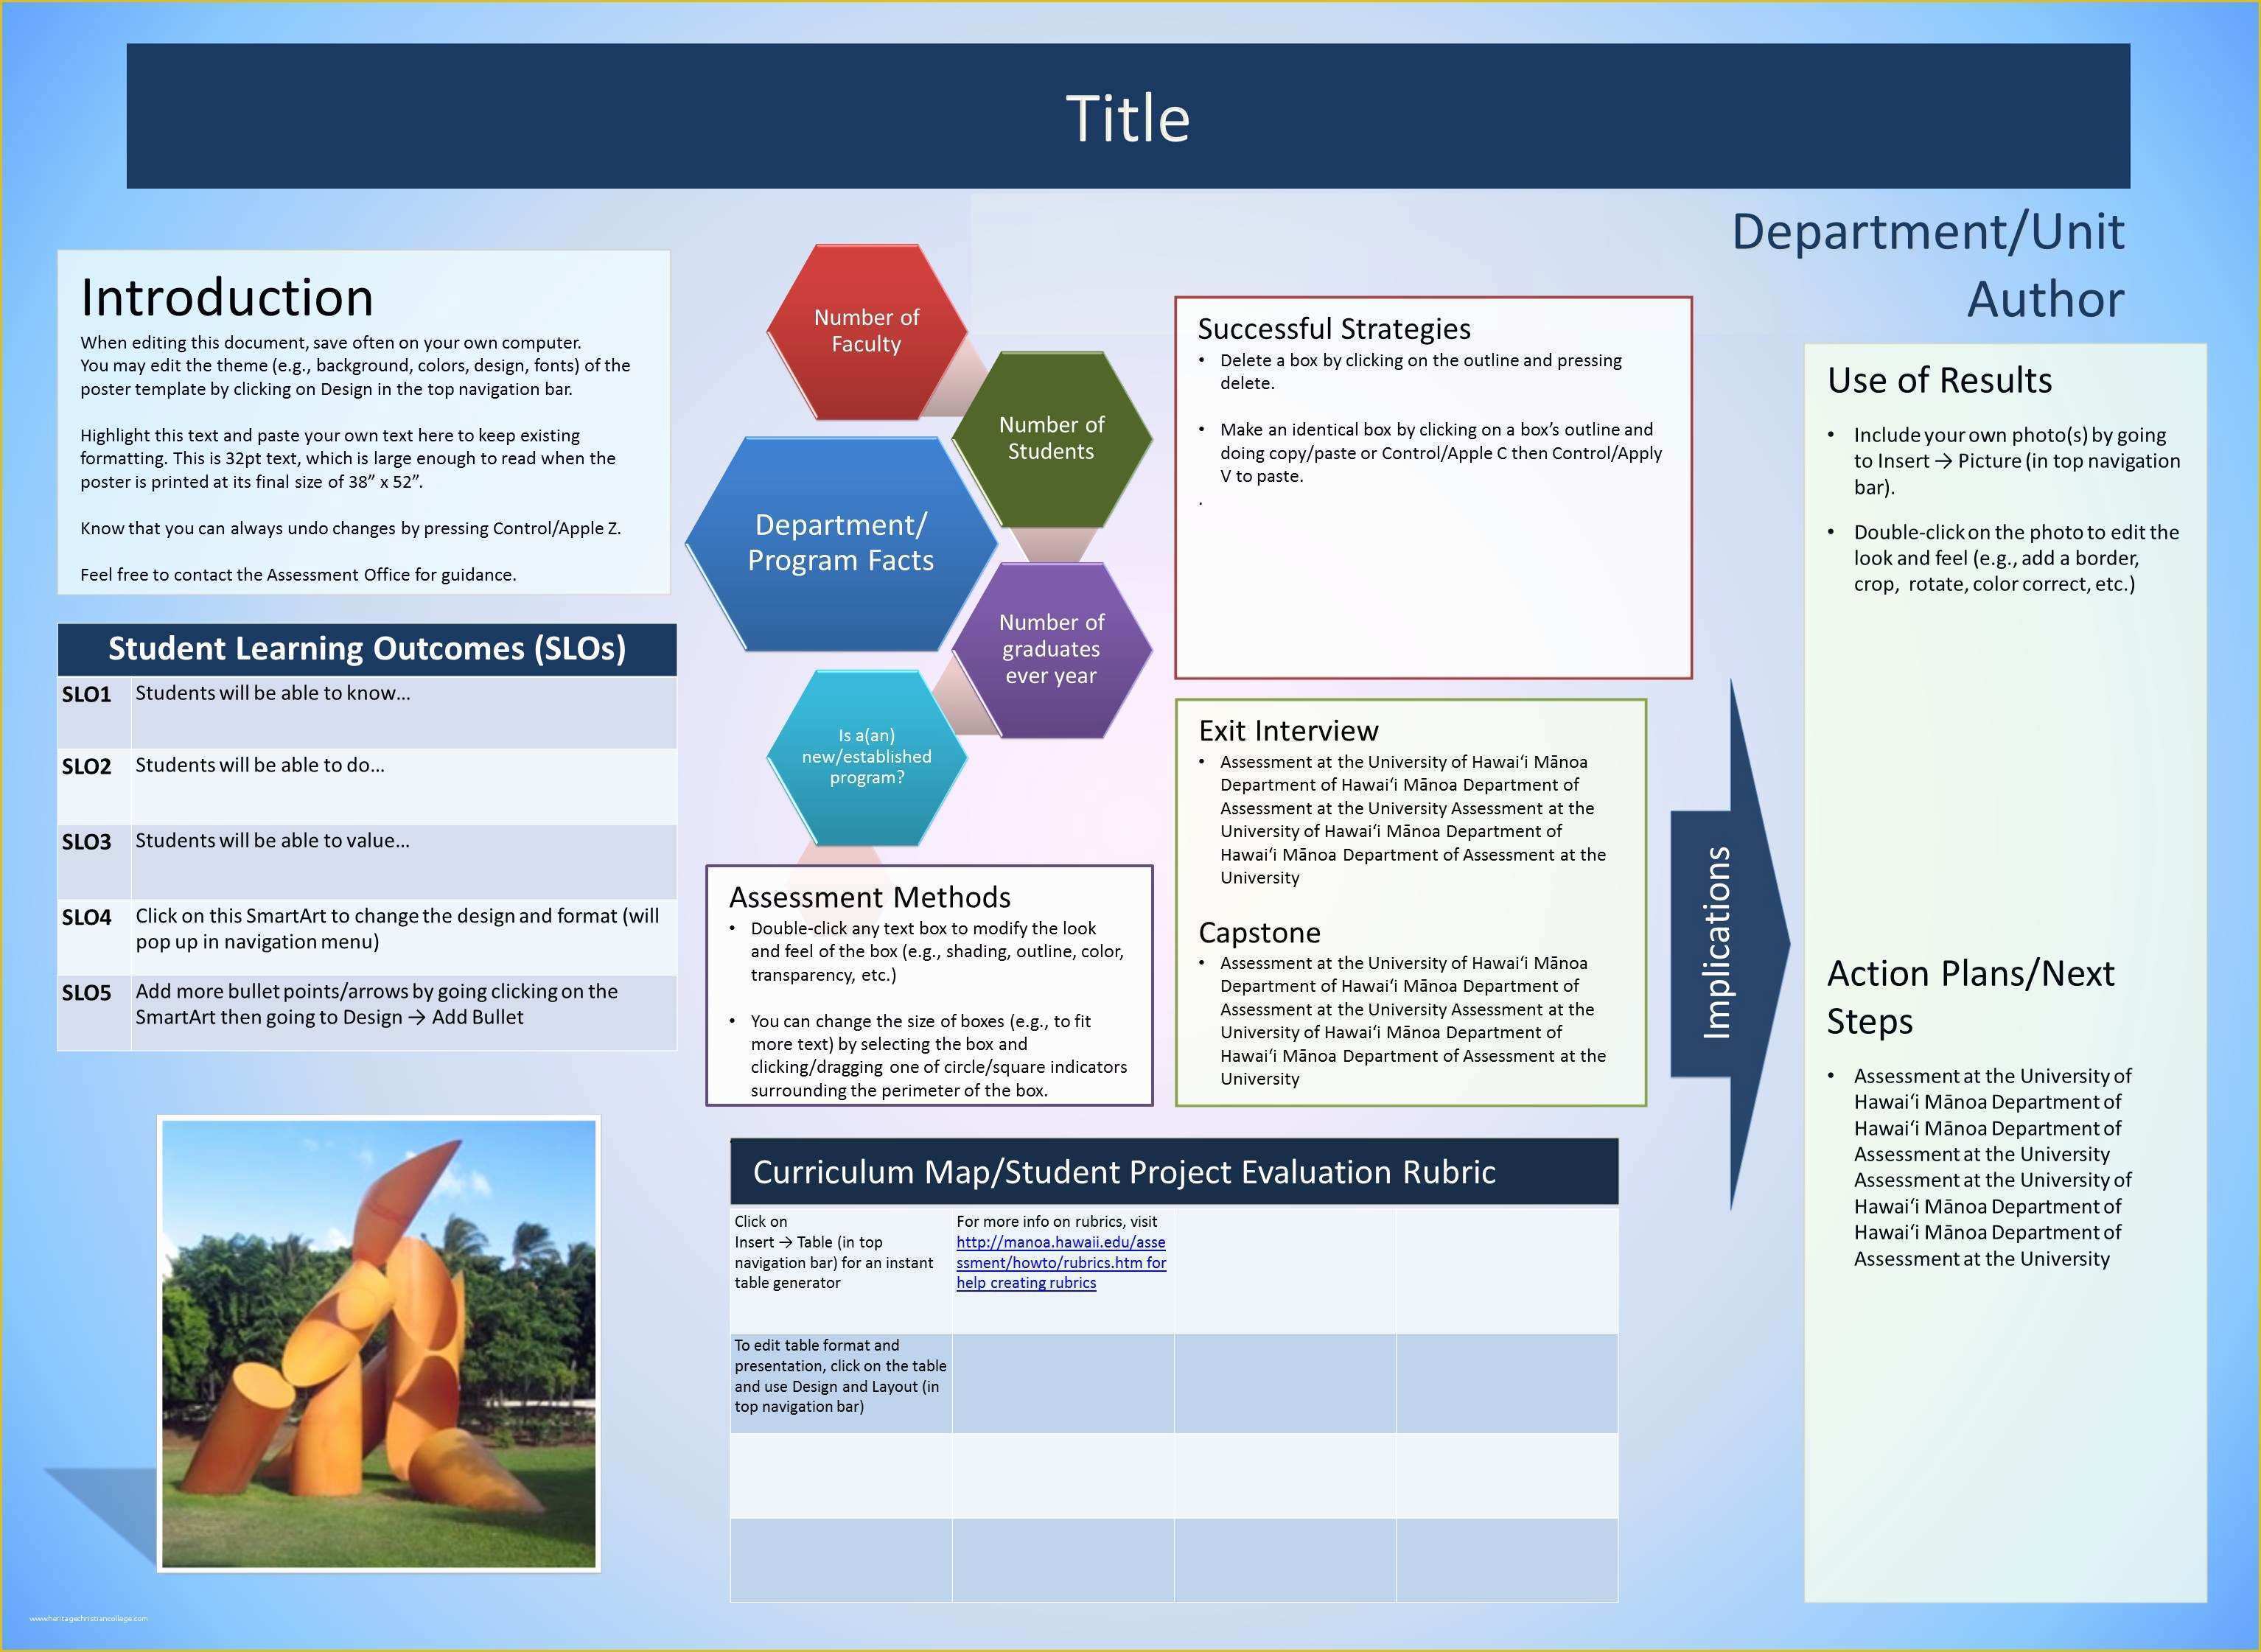 Research Poster Presentation Template Free Download Of University Of Hawaii at Manoa assessment Fice